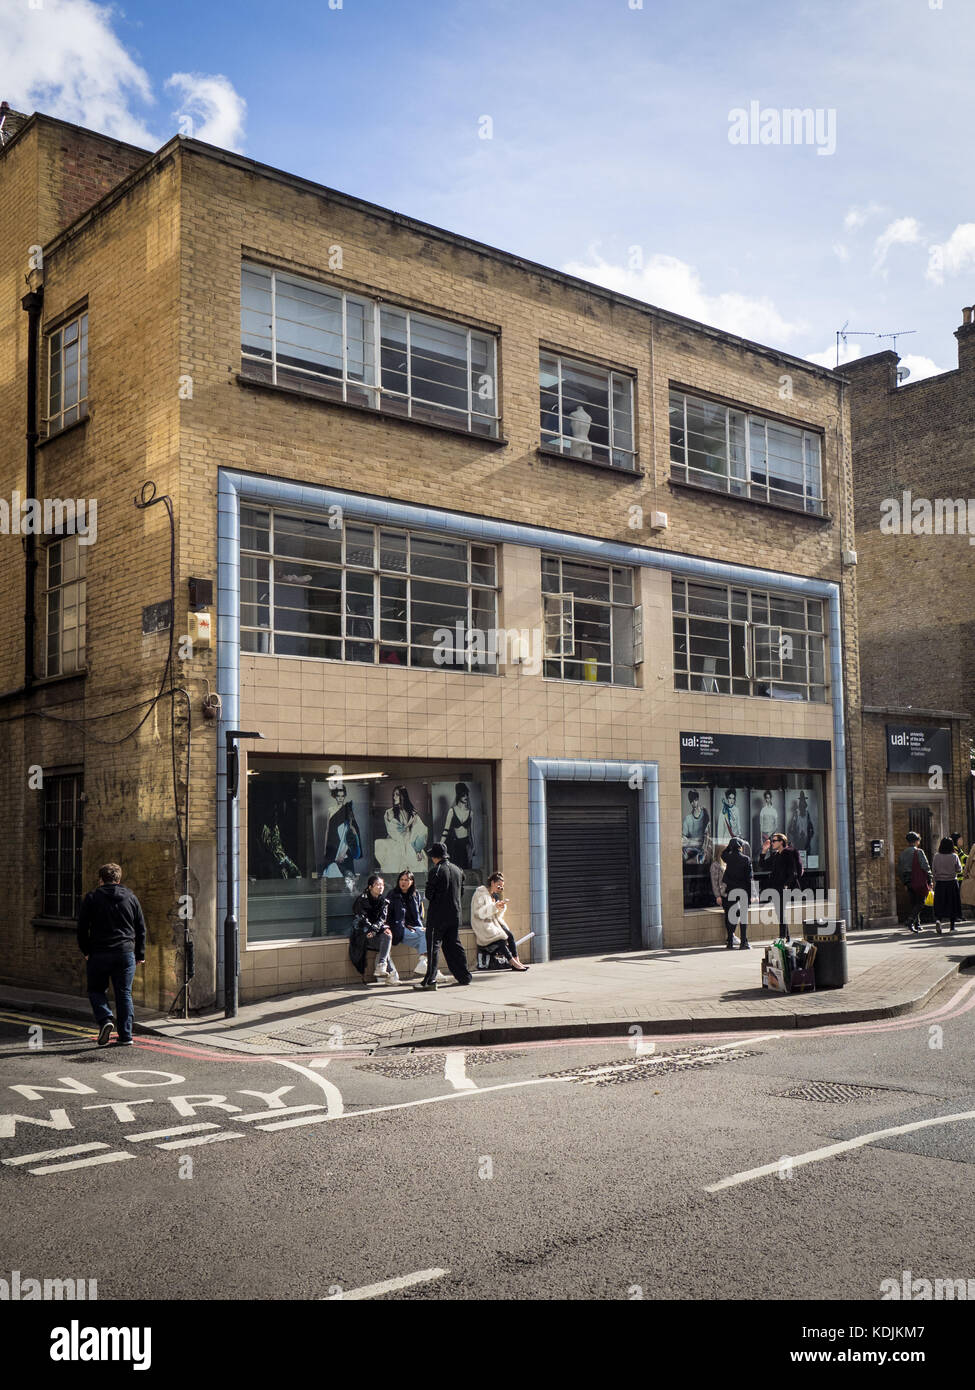 University of the Arts London College of Fashion in Curtain Road Shoreditch, East London Stock Photo